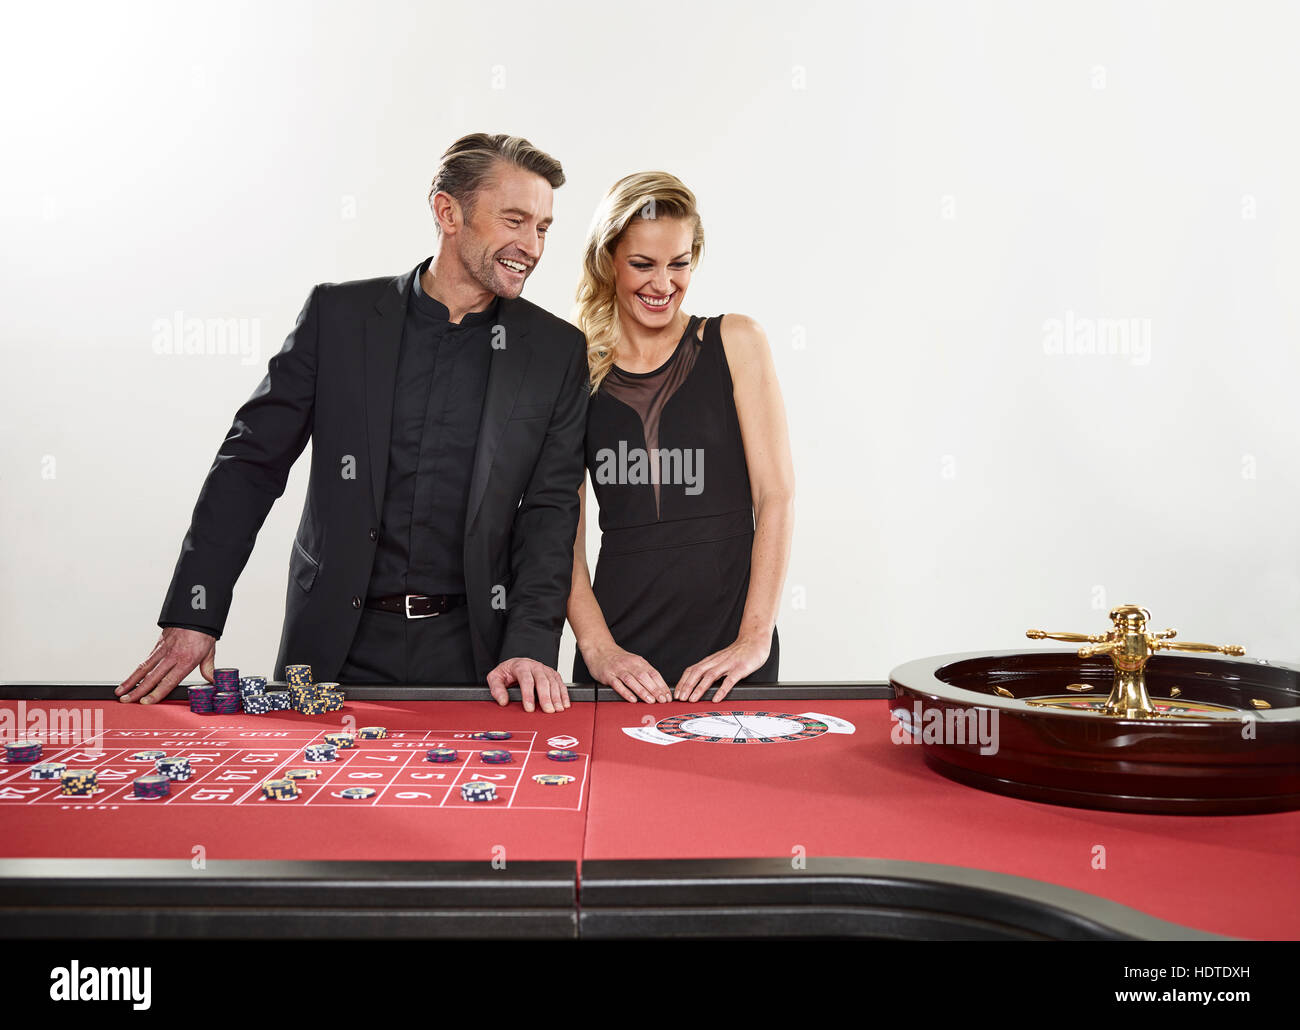 Couple playing roulette, casino, chips Stock Photo